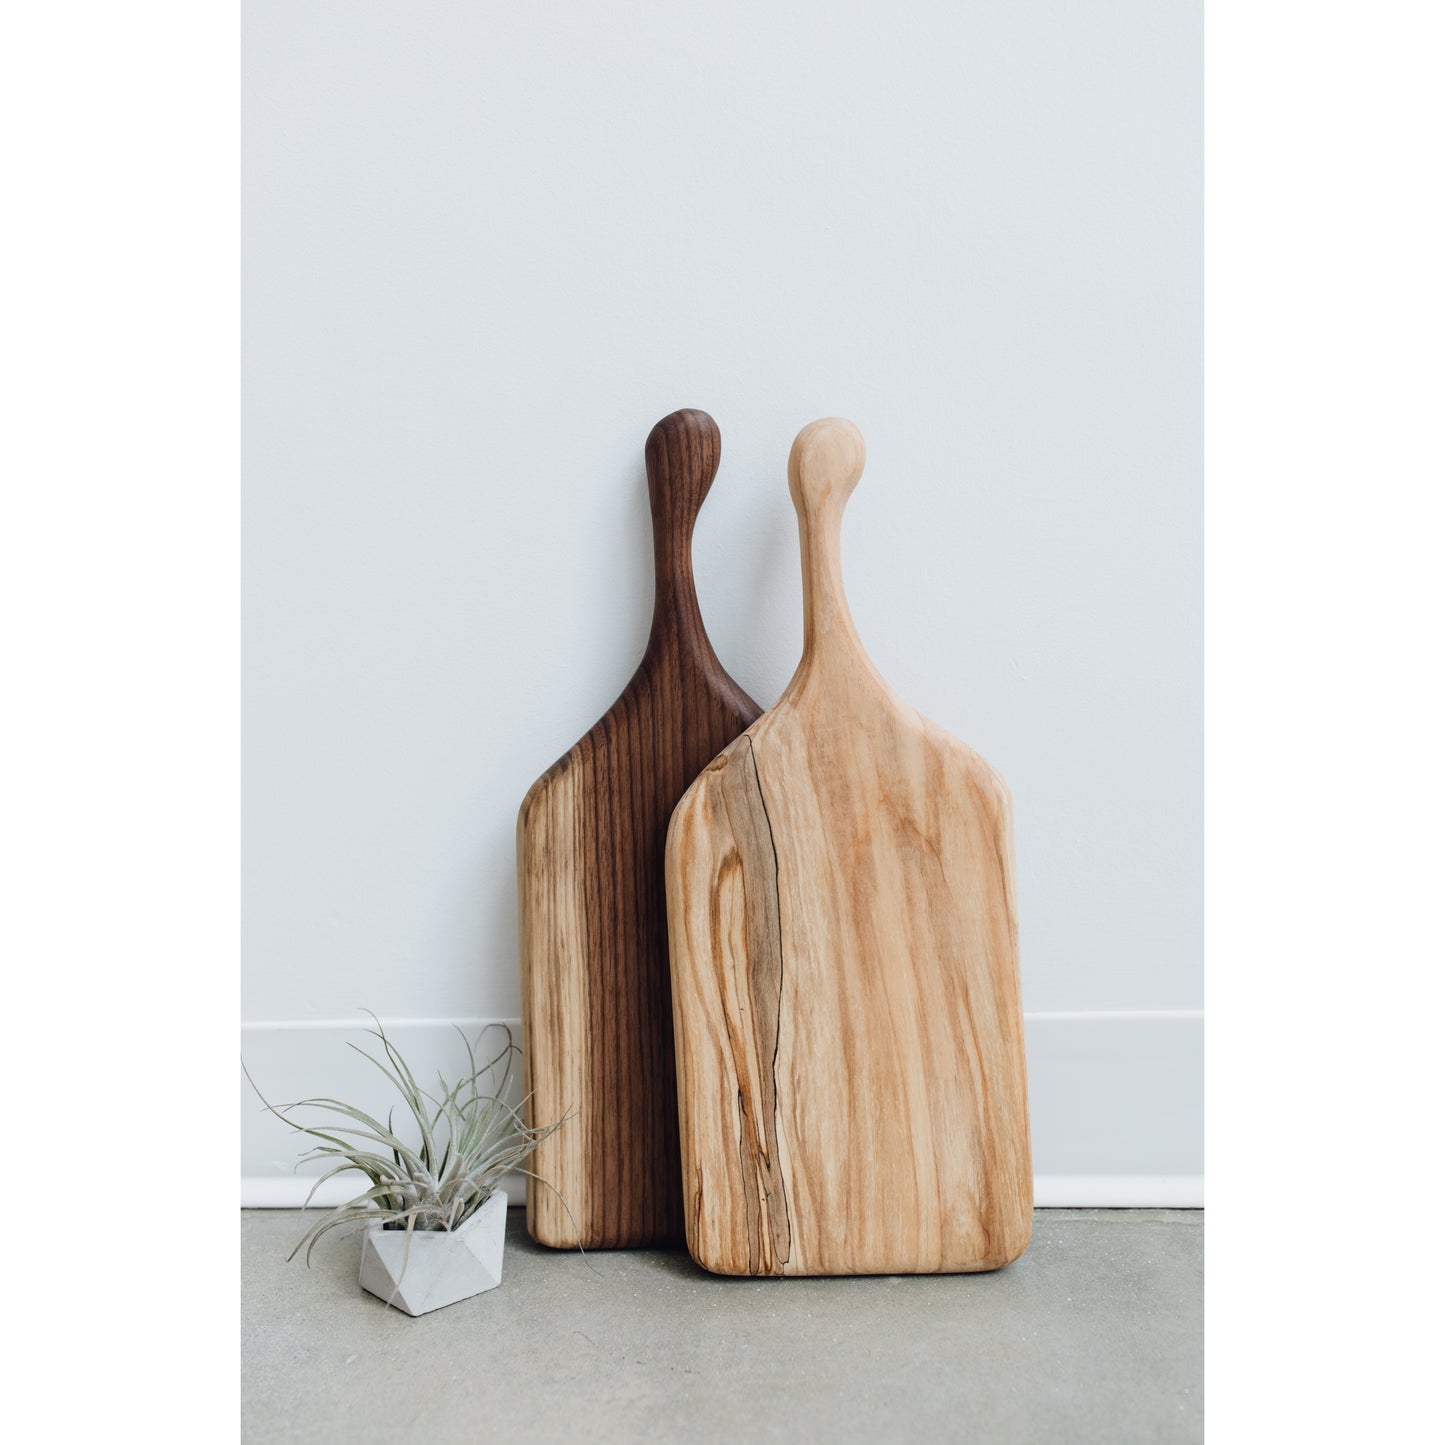 Hand-crafted cheeseboard perfect for a display of cheese or appetizers. The handle is perfect for carrying to the table, and adds visual interest. Made sustainably from maple wood in Gatineau, Canada.